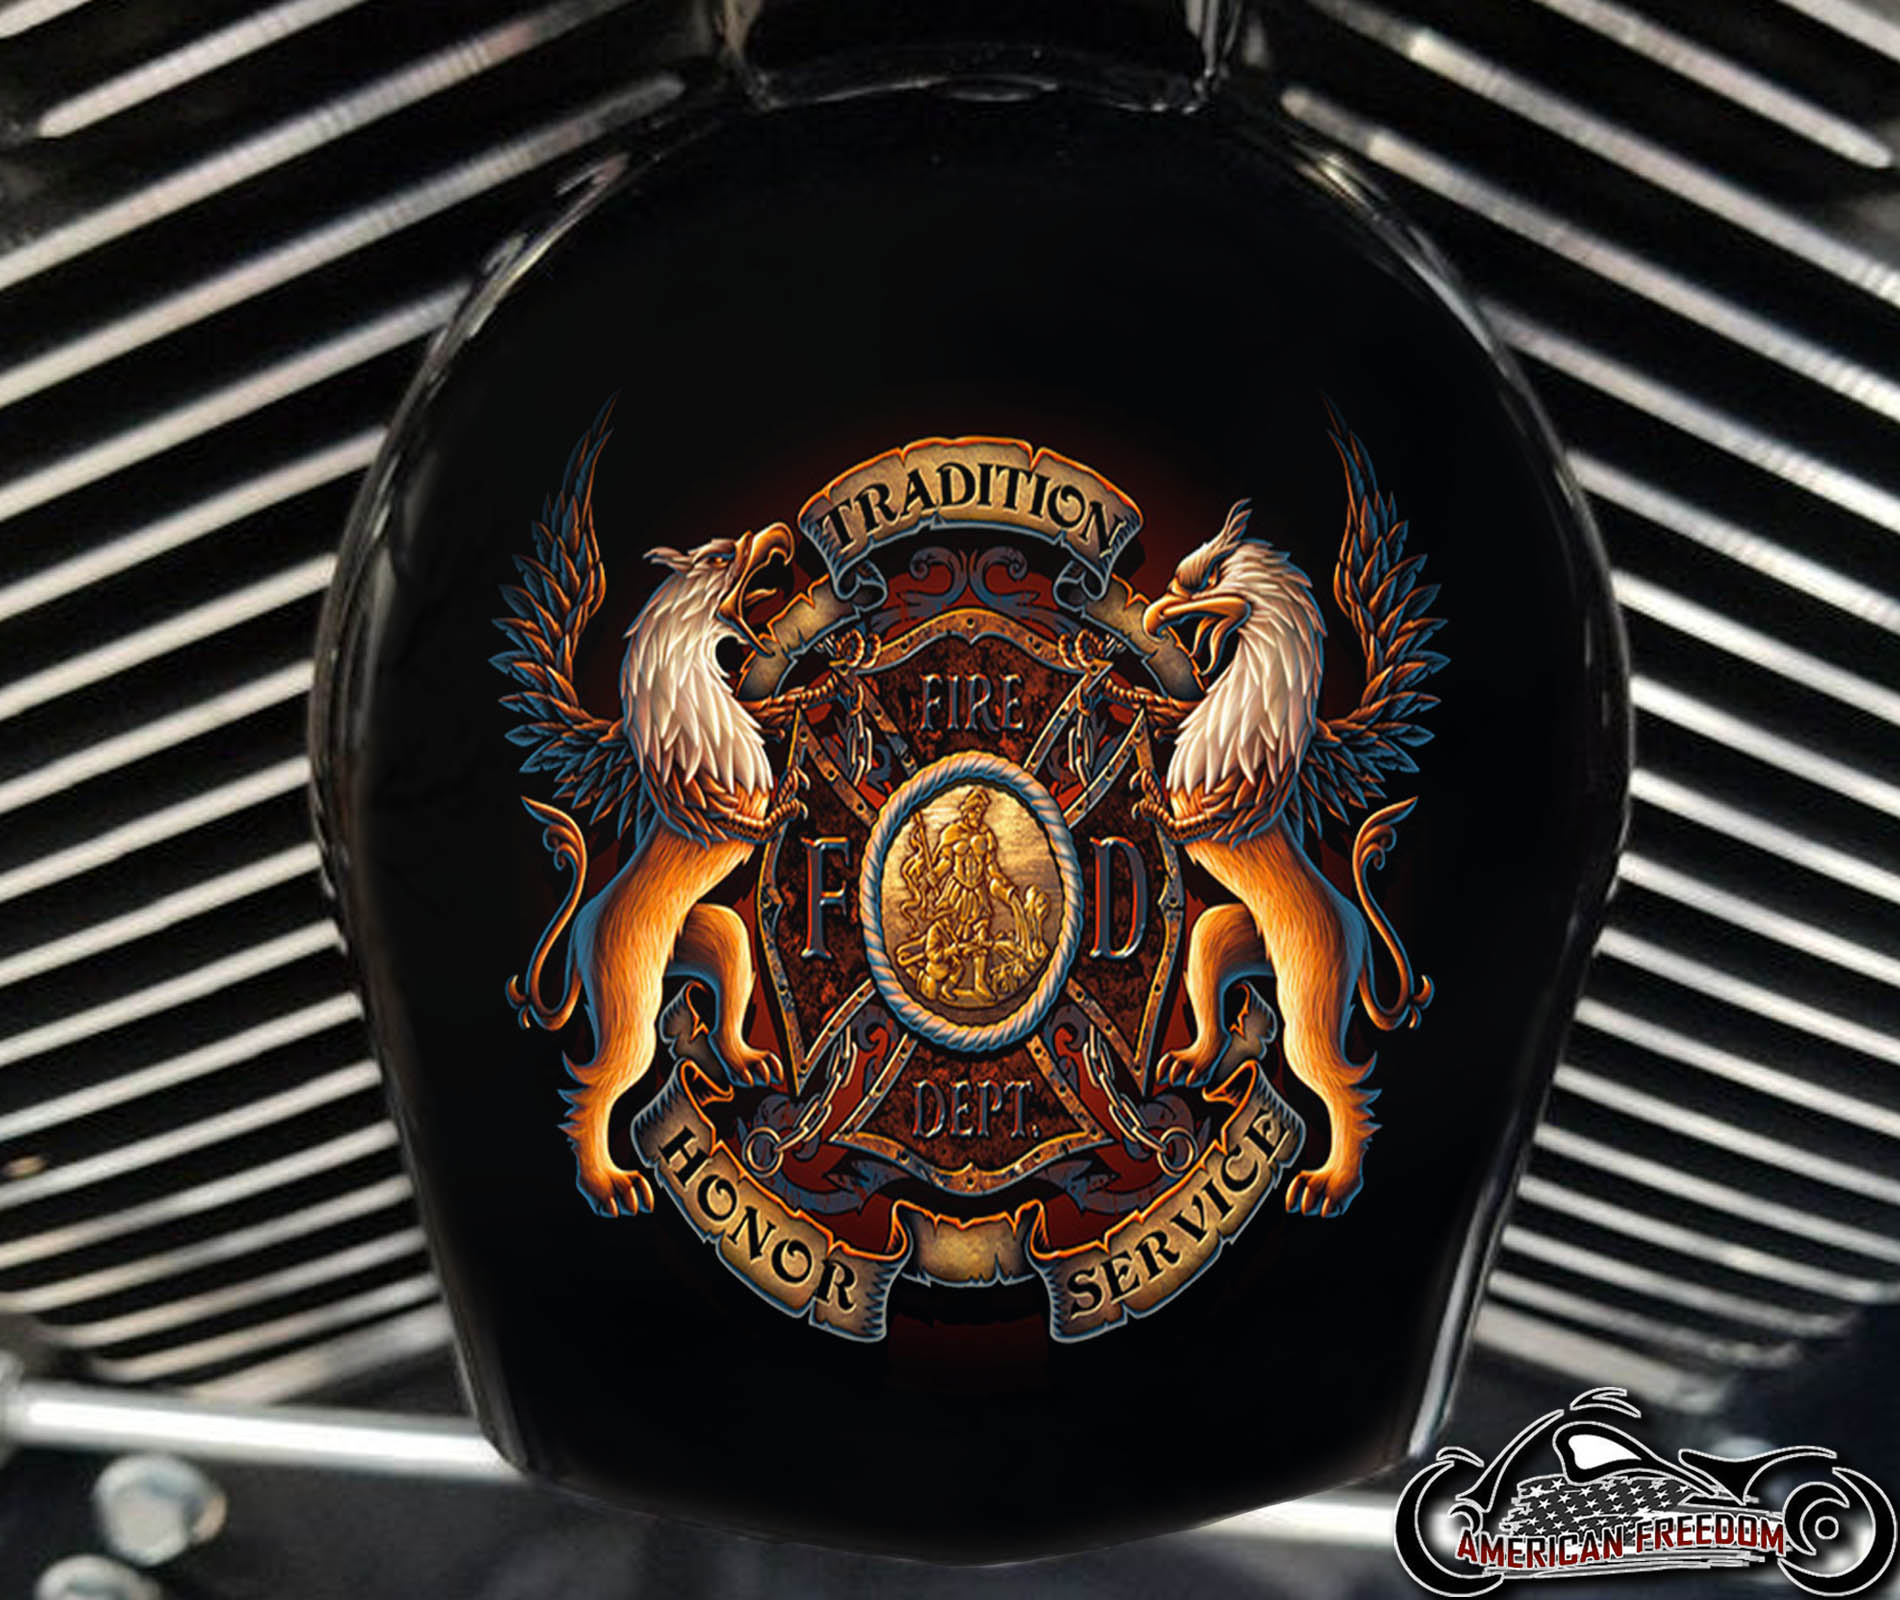 Custom Horn Cover - Firefighter Tradition Honor Service